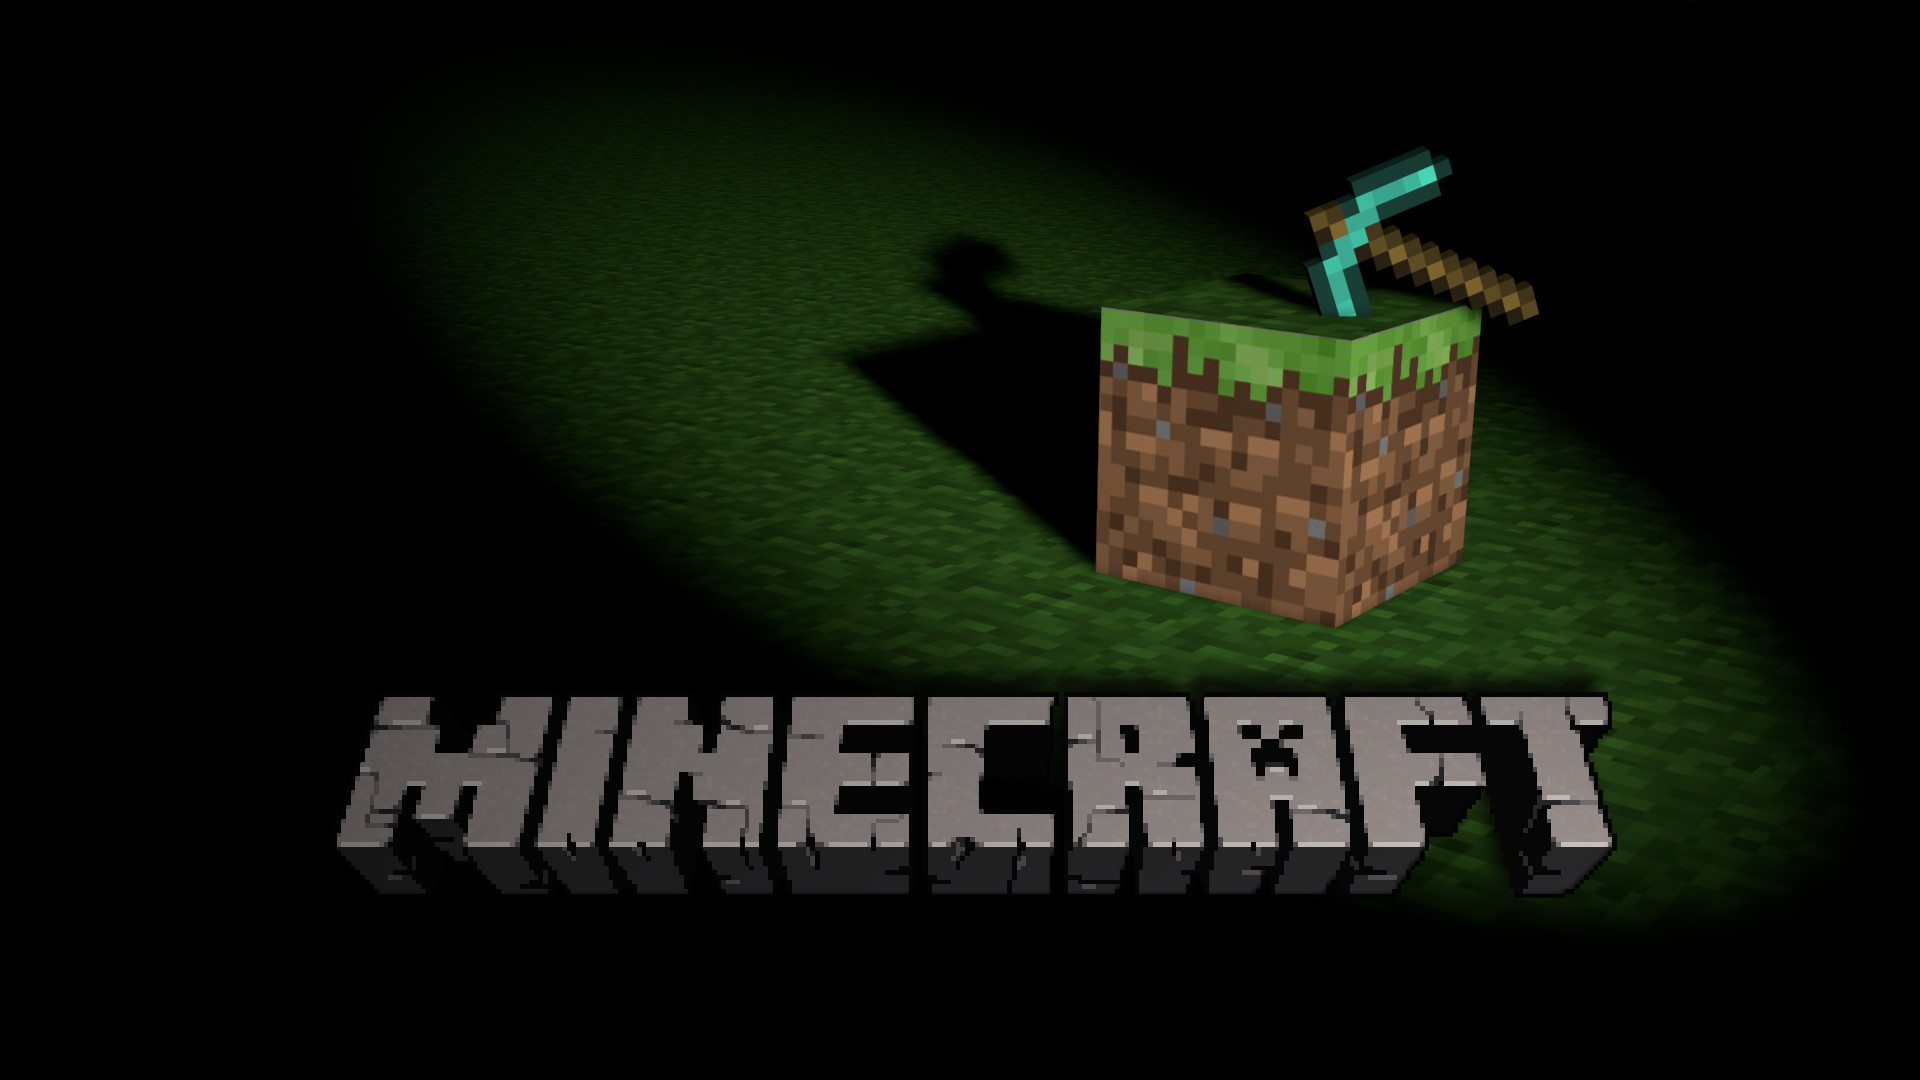 1920x1080 6 Cool Minecraft Backgrounds for Your Phone